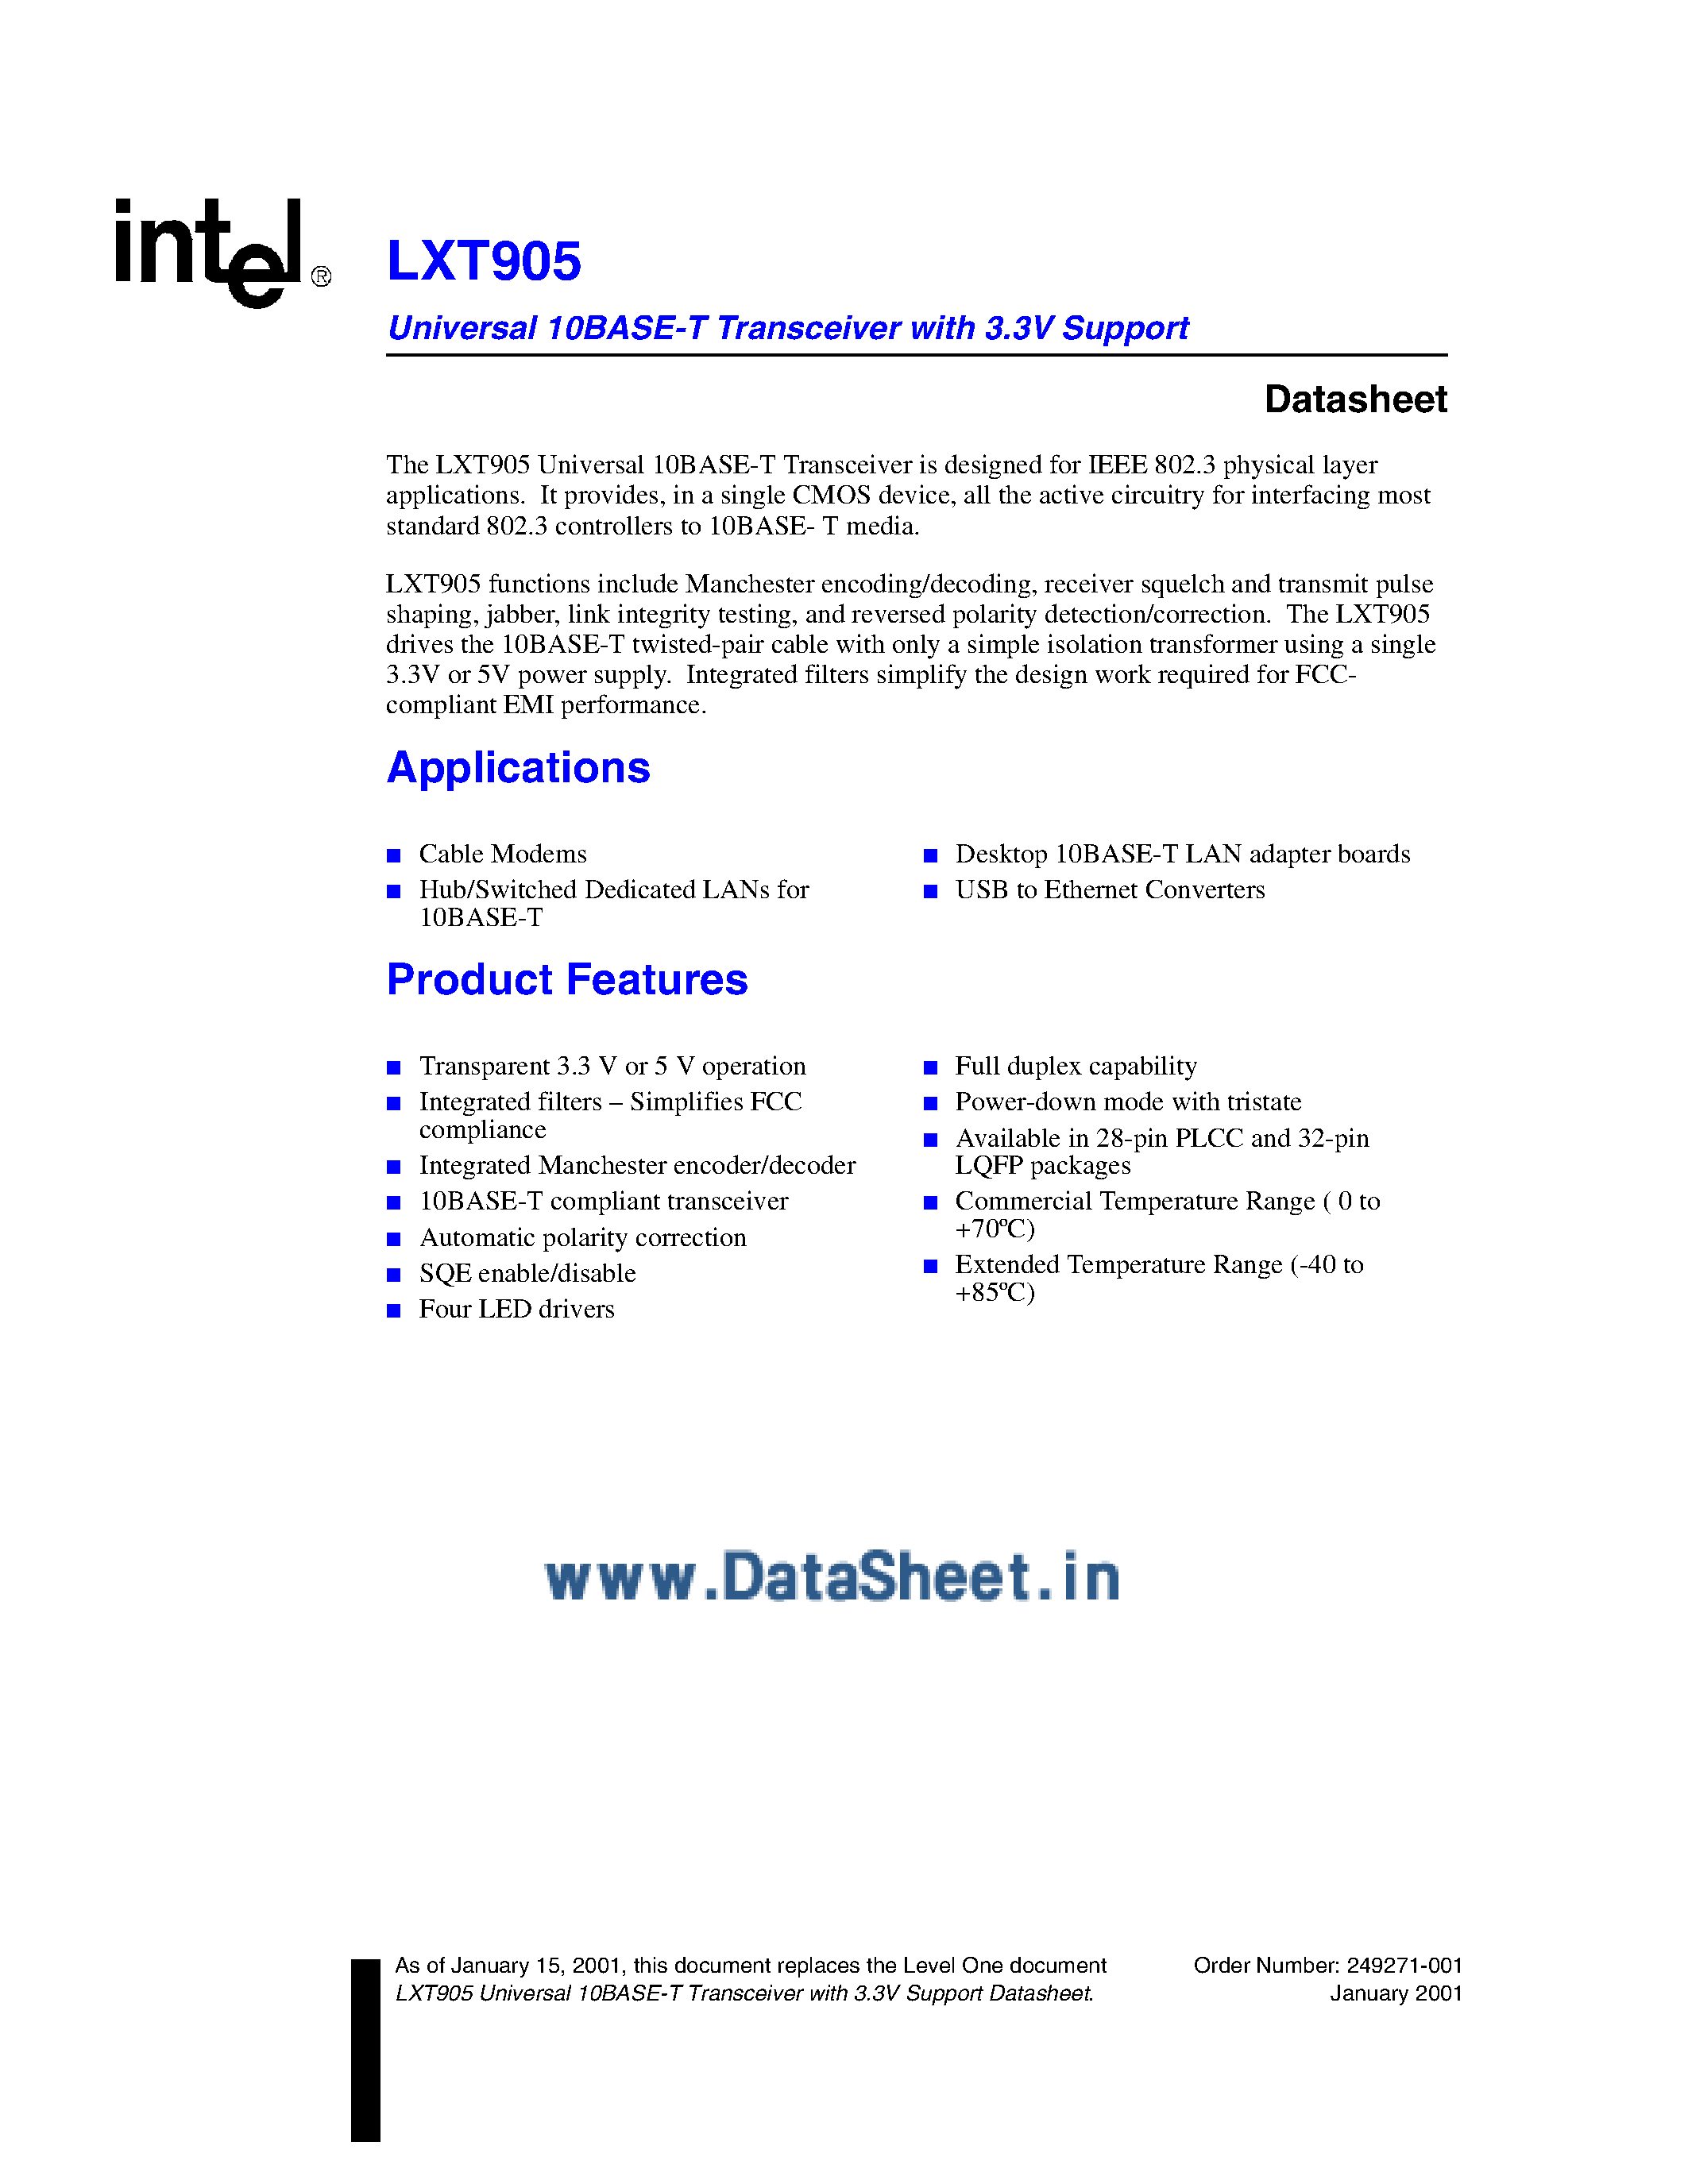 Datasheet LXT905 - Universal 10Base-T Transceiver with 3.3V Support page 1